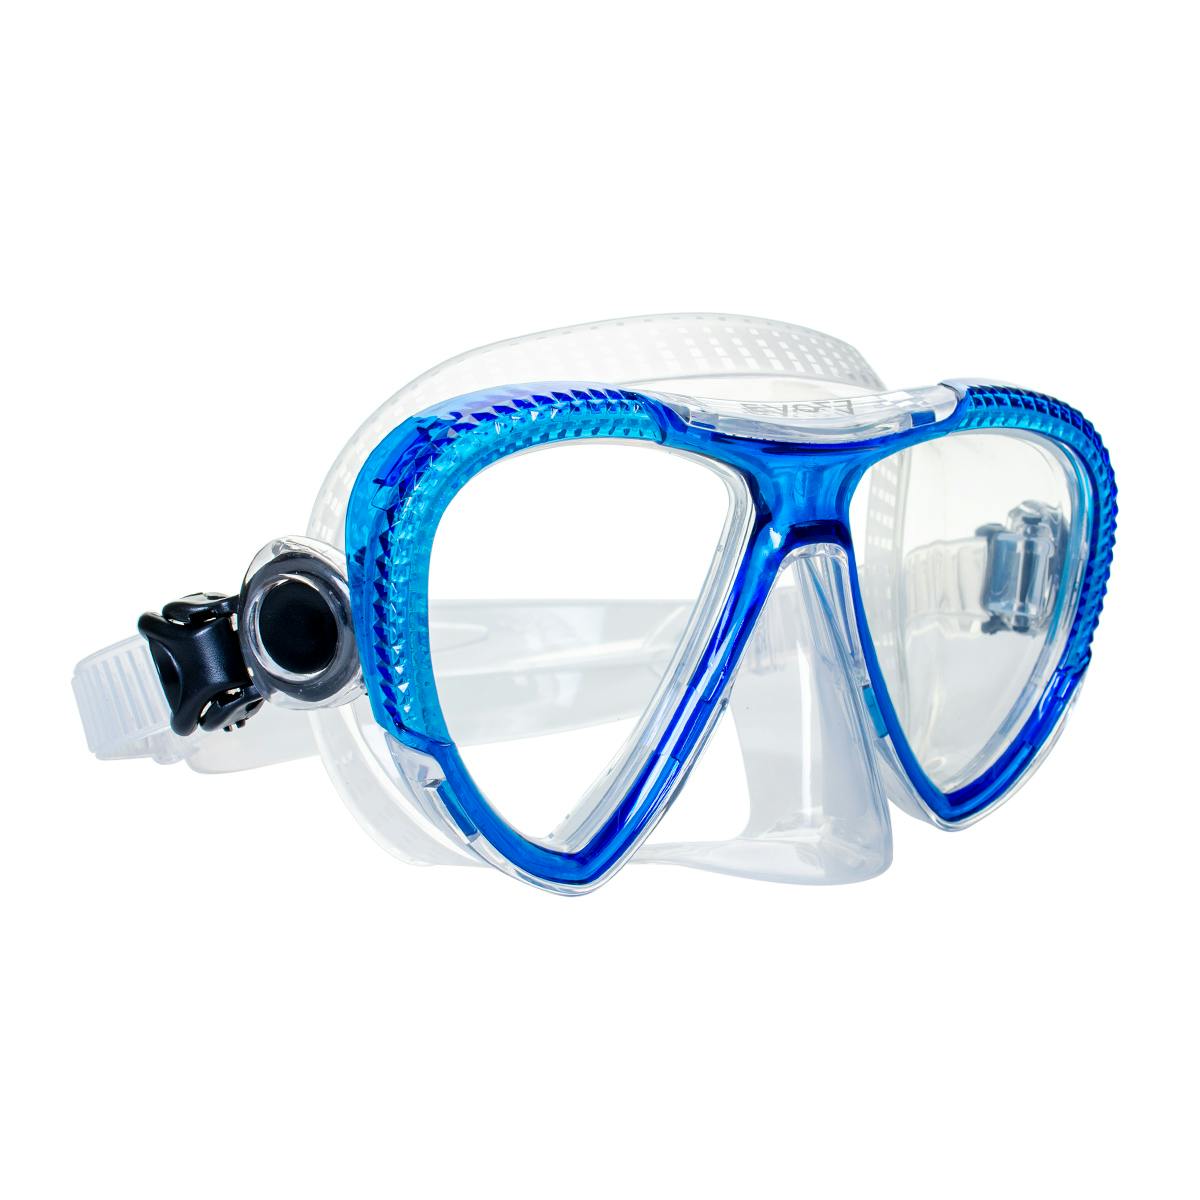 EVO Abaco Mask, Two Lens - Clear/Blue